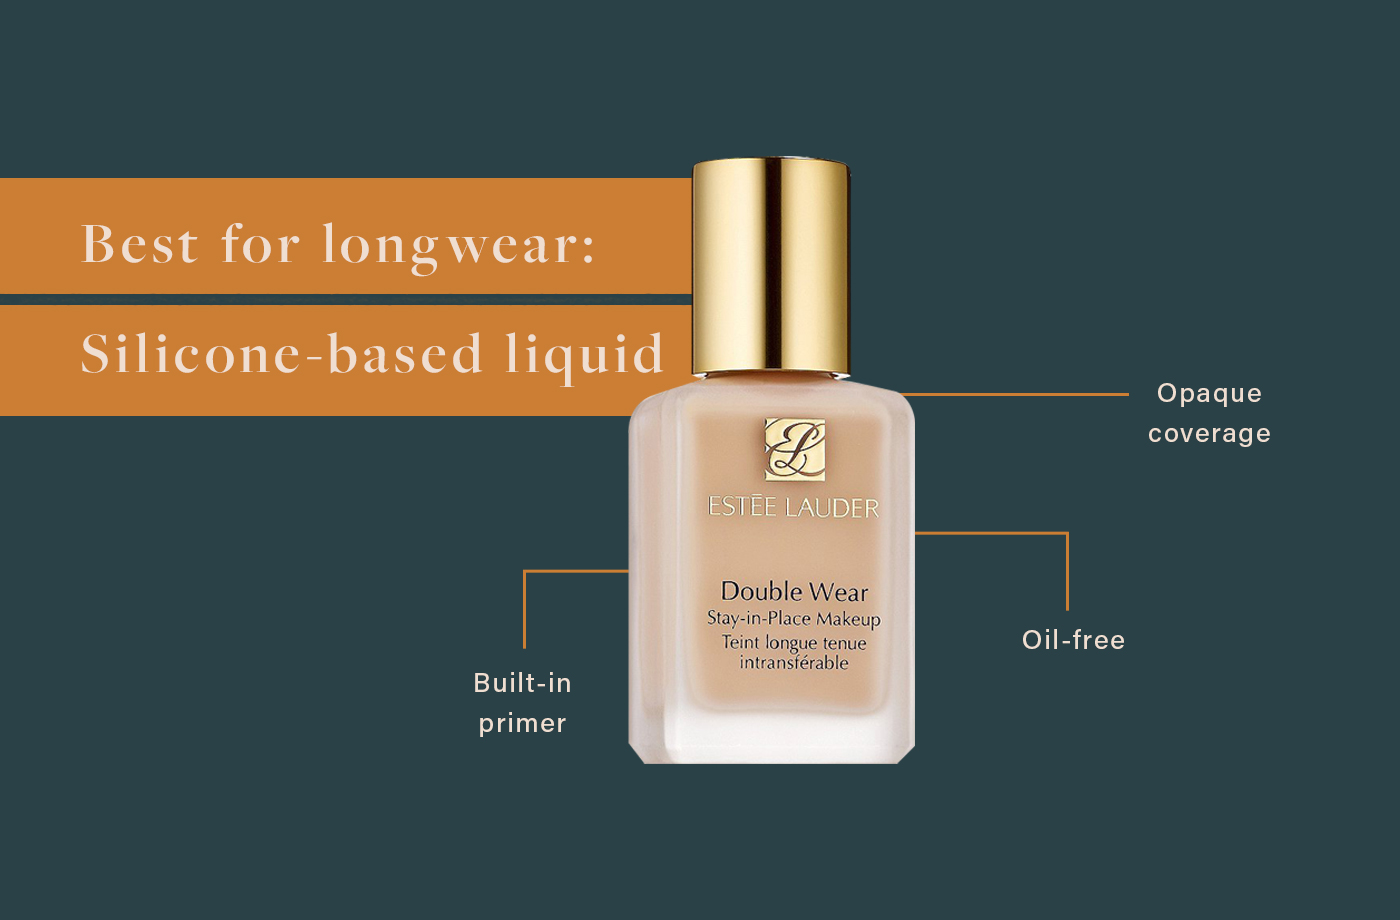 The best foundation for skin based on ingredients | Well+Good